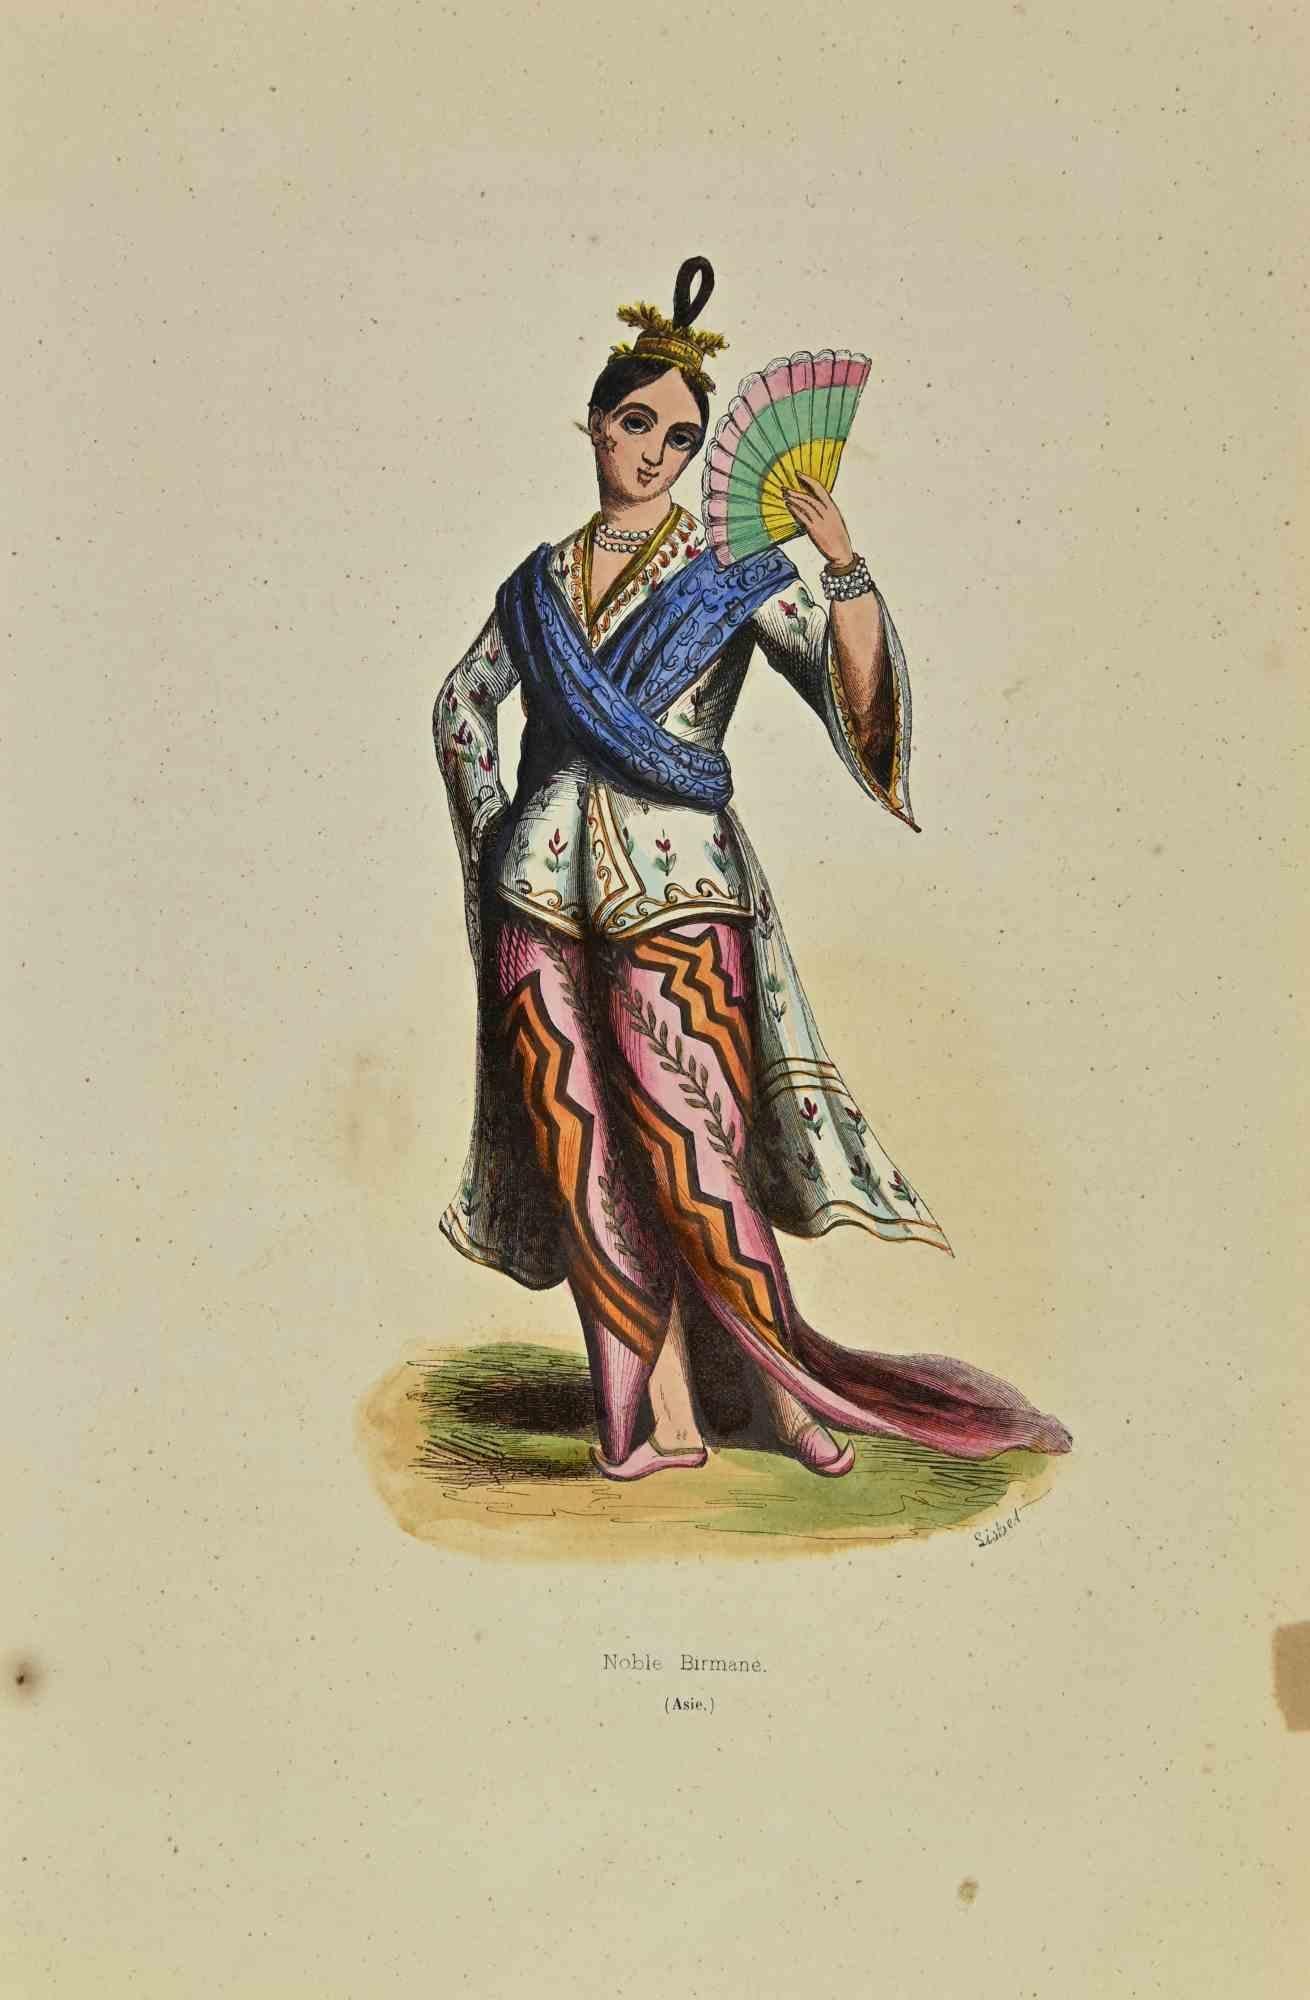 Burmese Nobleman is a lithograph made by Auguste Wahlen in 1844.

Hand colored.

Good condition.

At the center of the artwork is the original title "Noble Birmane".

The work is part of Suite Moeurs, usages et costumes de tous les peuples du monde,